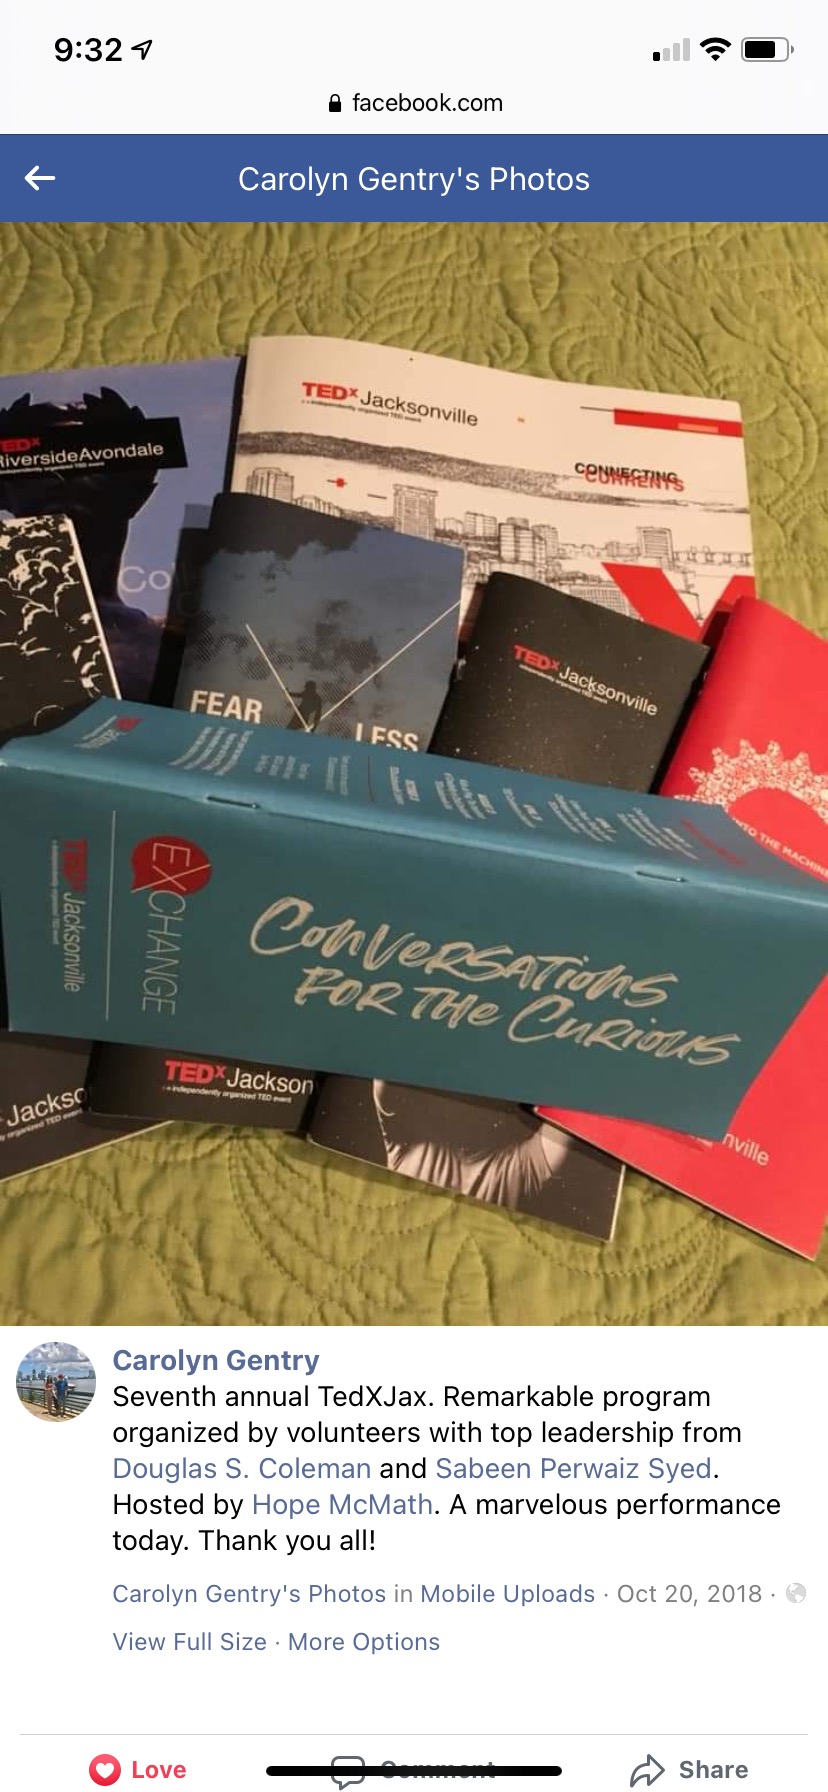 Gentry displays her collection of TEDxJacksonville programs after the 2018 conference.